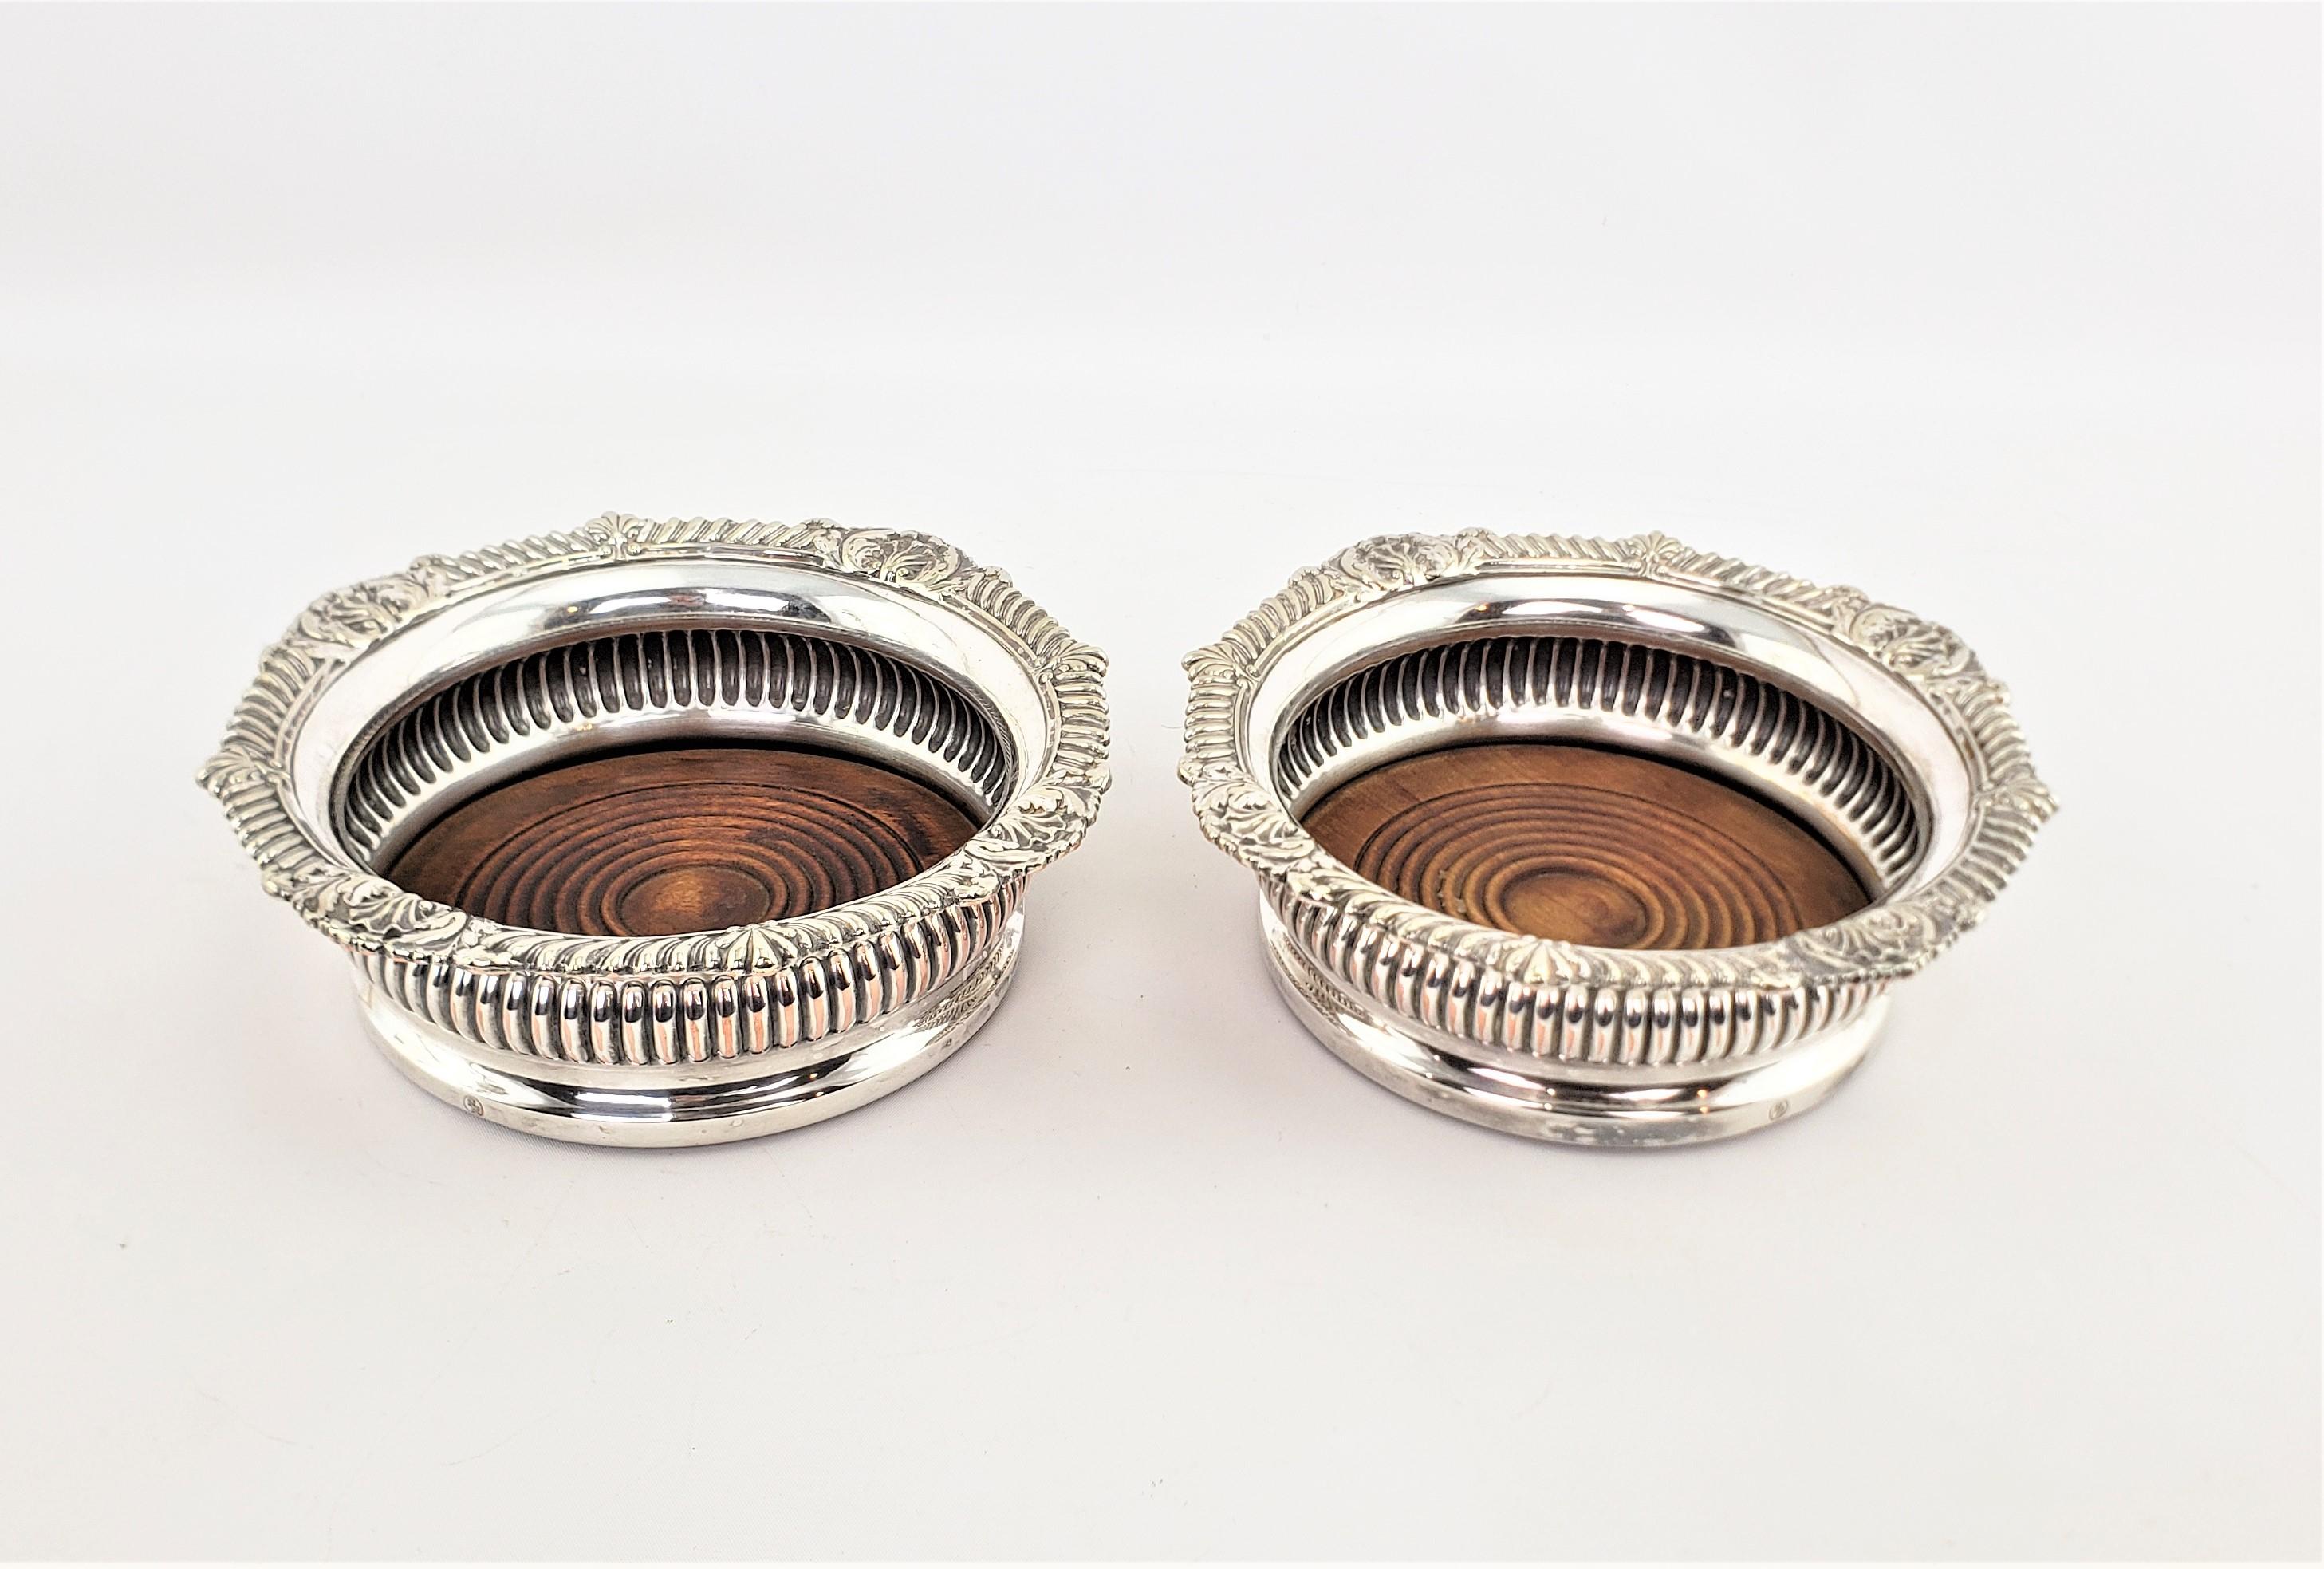 This pair of large wine bottle coasters are unsigned with respect to the maker, but originate from England and date to approximately 1920 and done in a Victorian style. The bottle coasters are composed of silver plate with deep ribbed sides and a